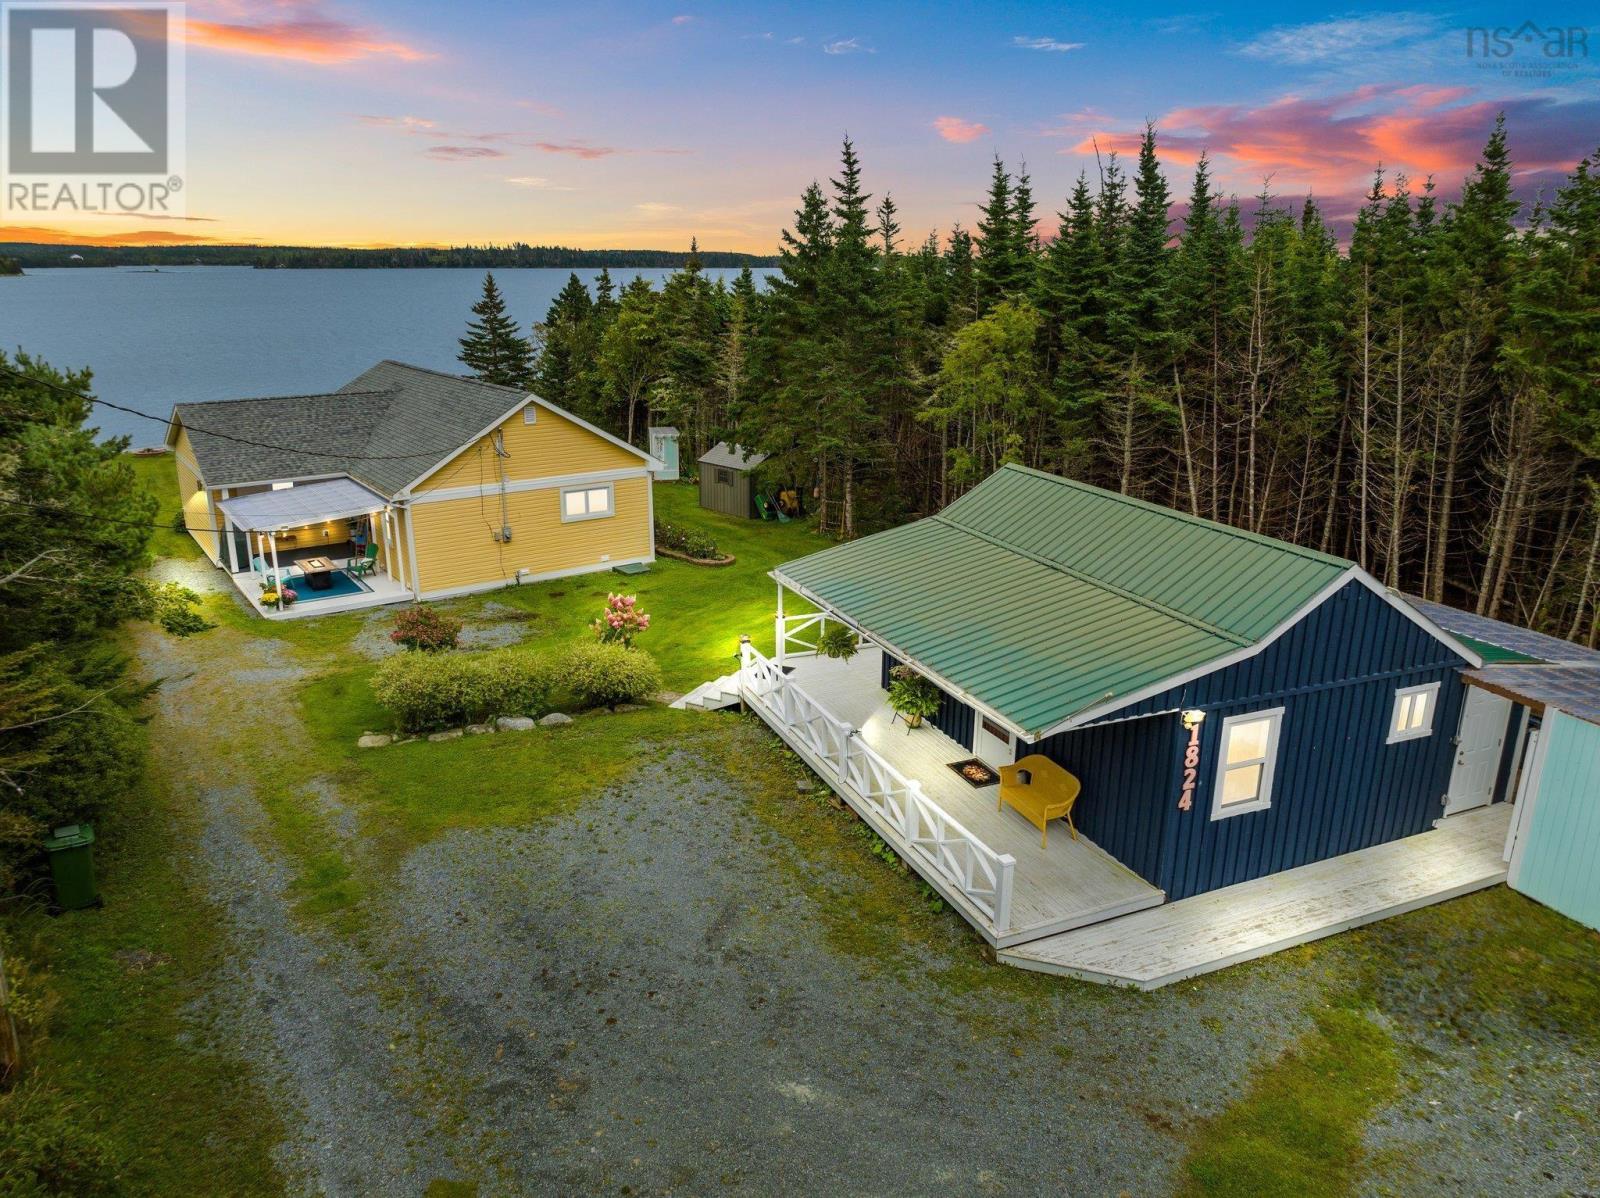 1824 Crowell Road located in East Lawrencetown, Nova Scotia